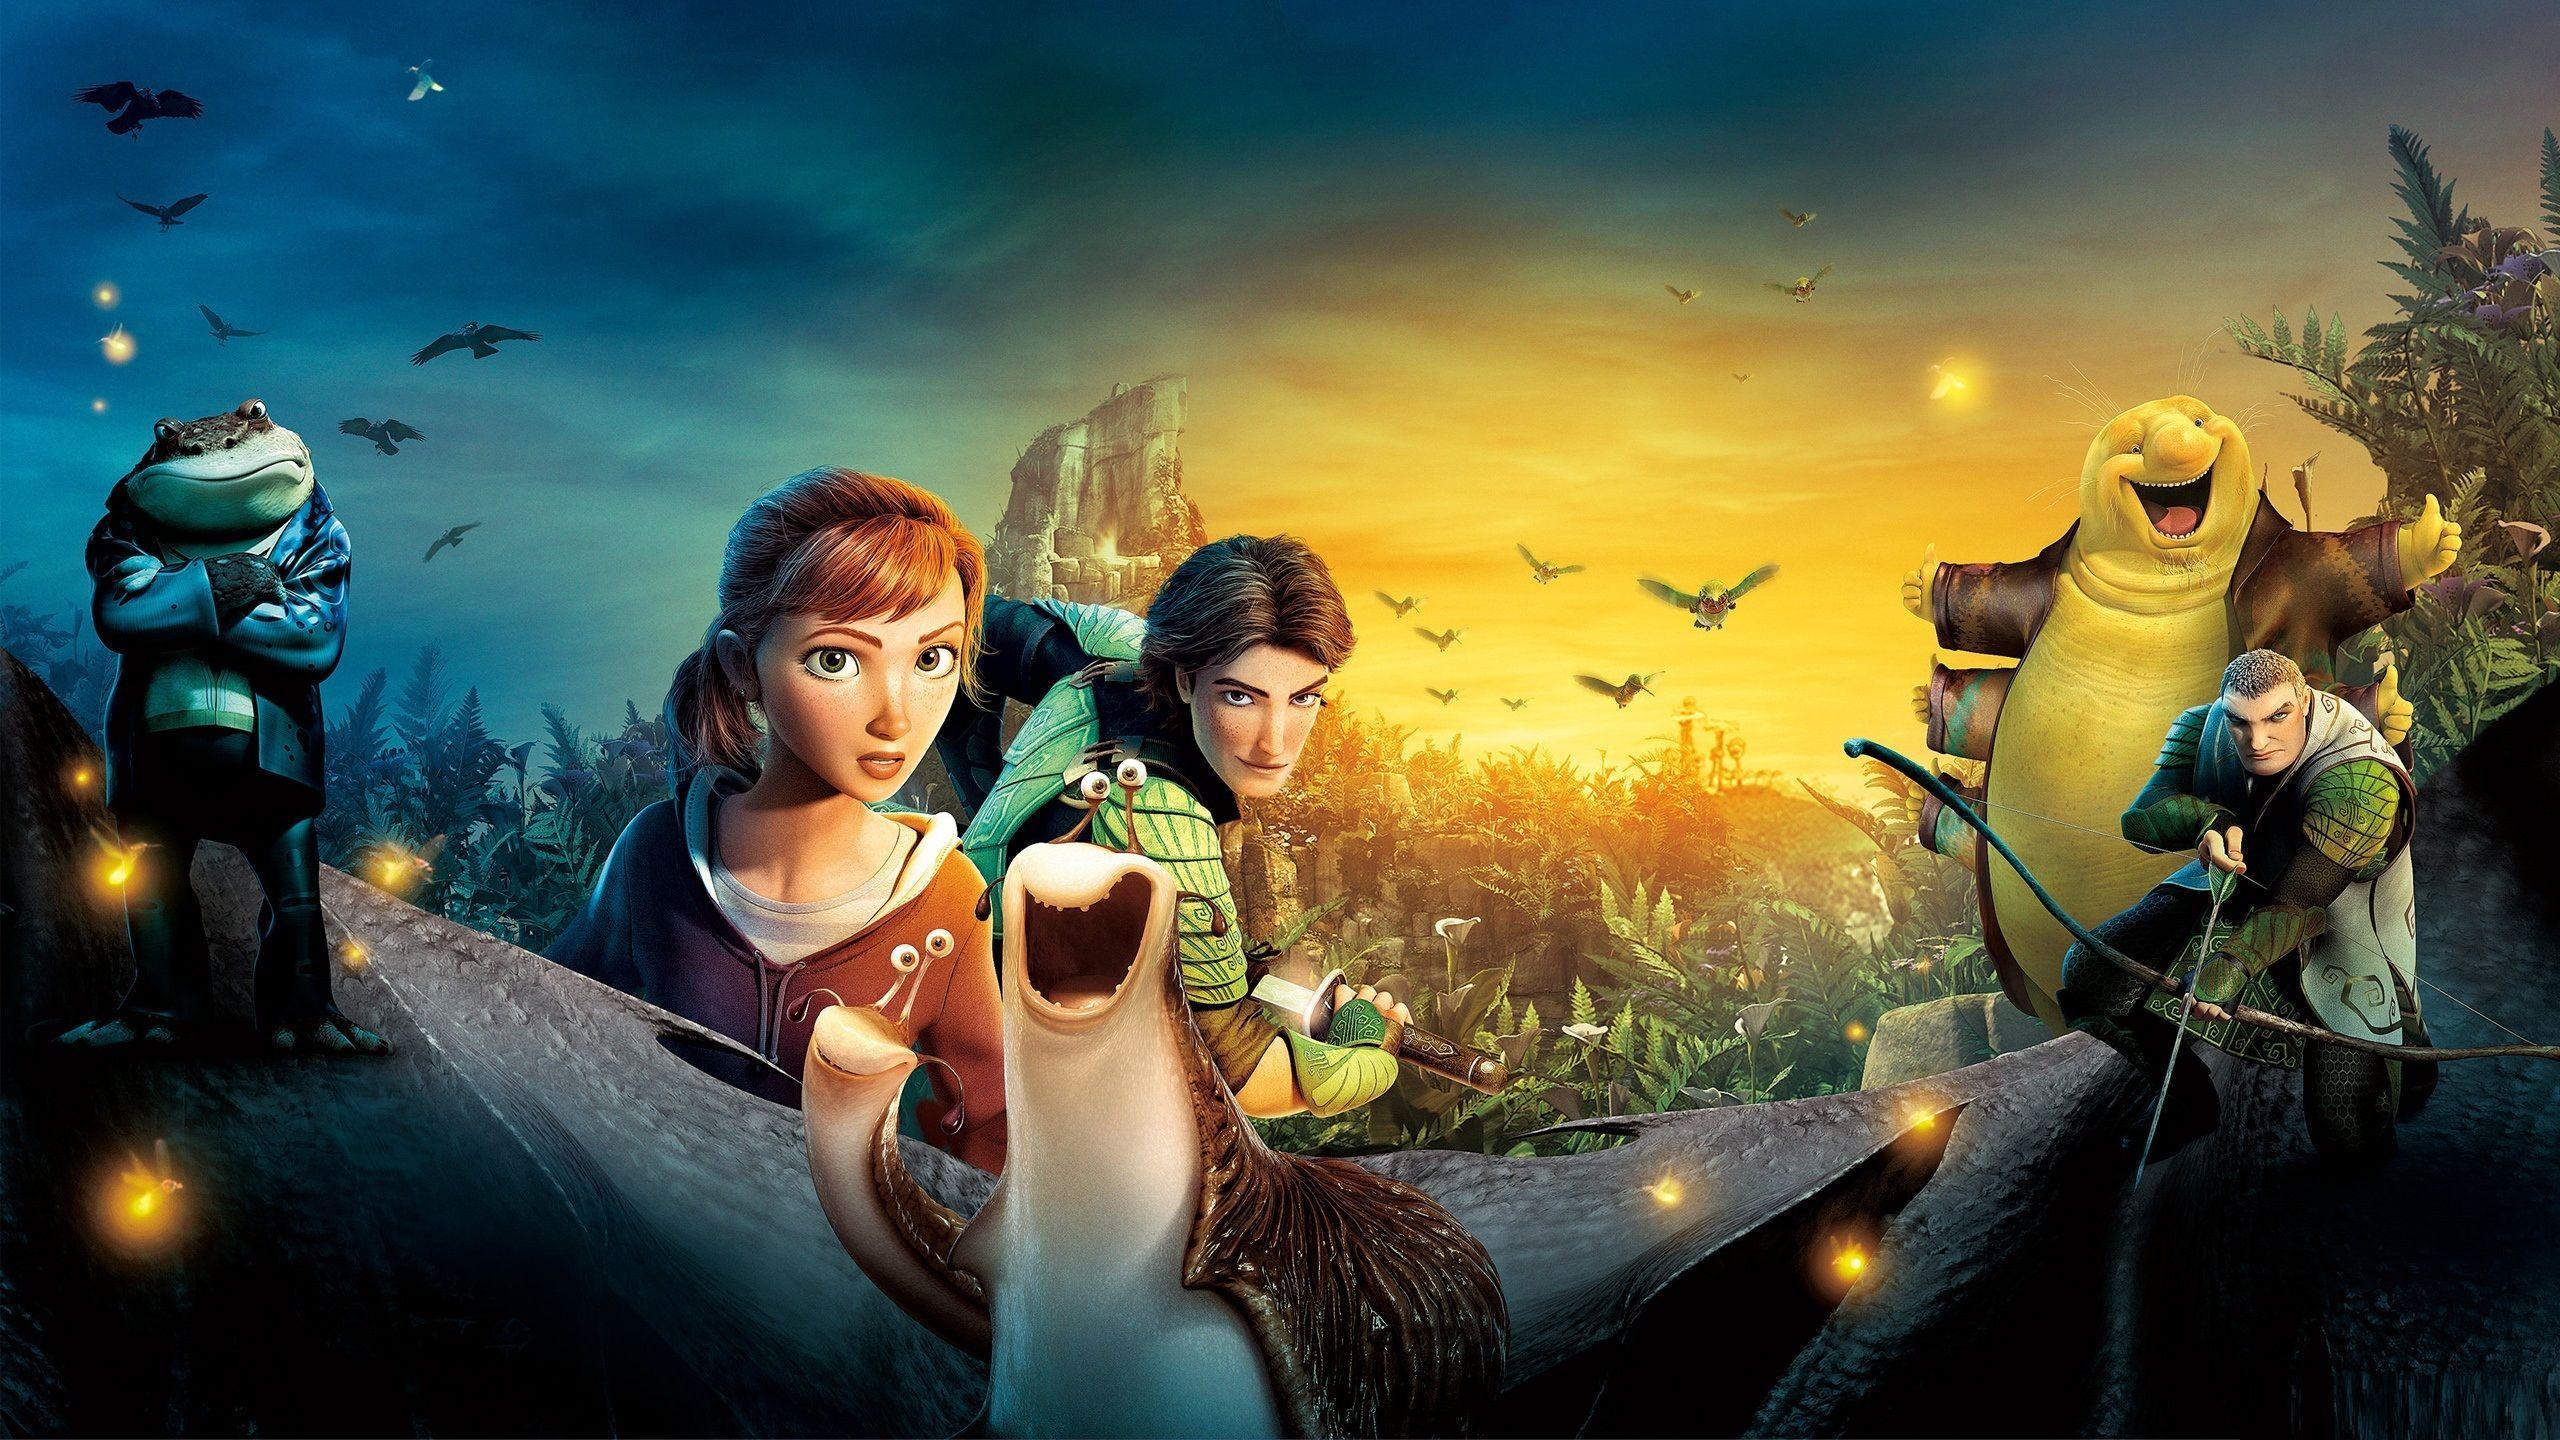 epic animated movie wallpapers